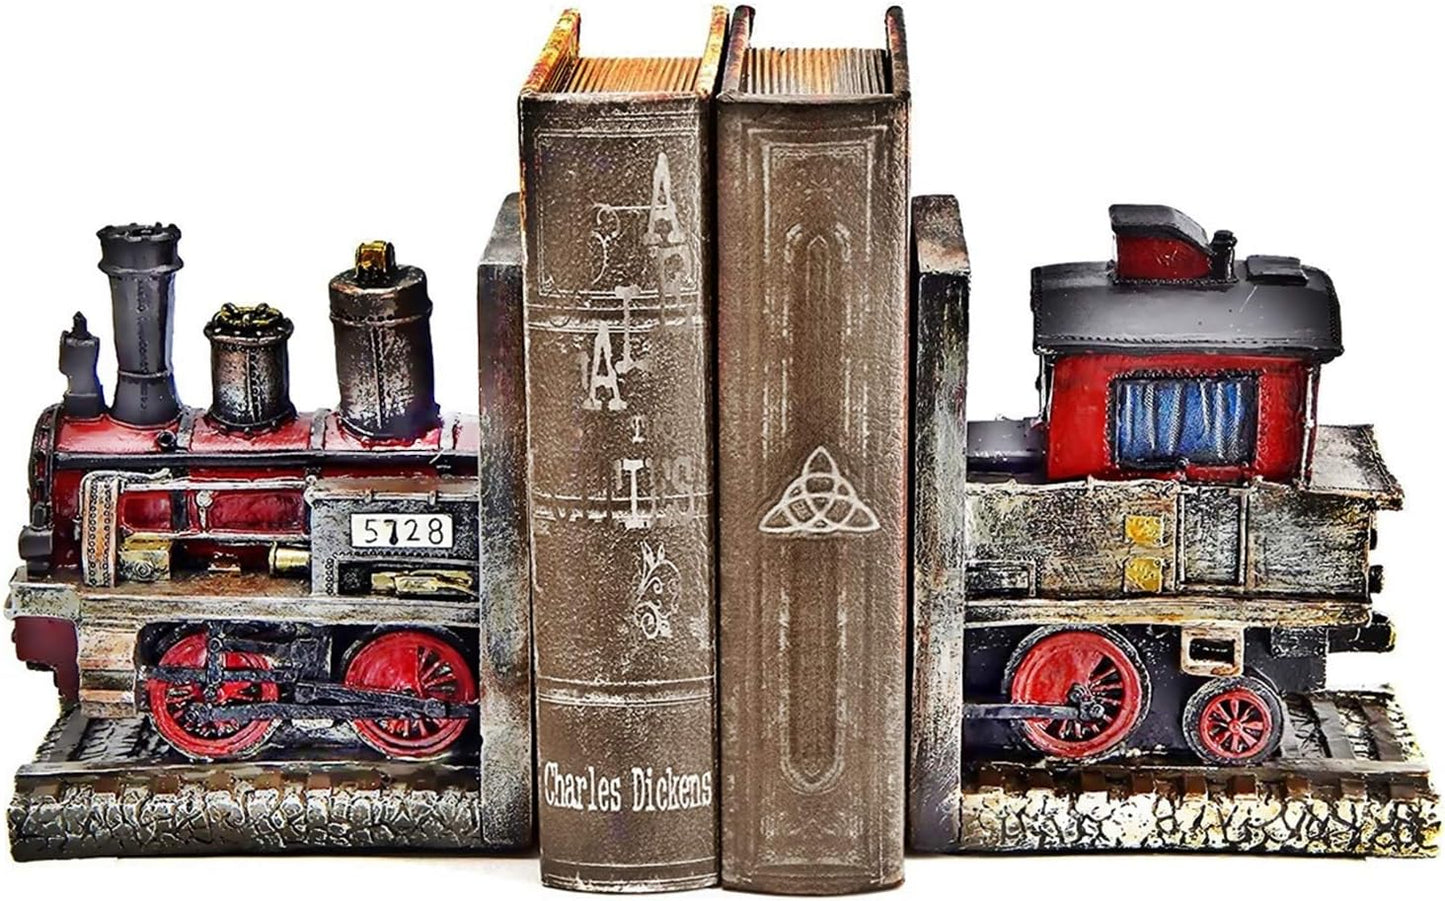 20928 Decorative Bookends Train Steam Locomotive Engine Industrial Car Salon Gear Book Ends Shelves Support Heavy Duty Rustic Vintage Style Noble Express